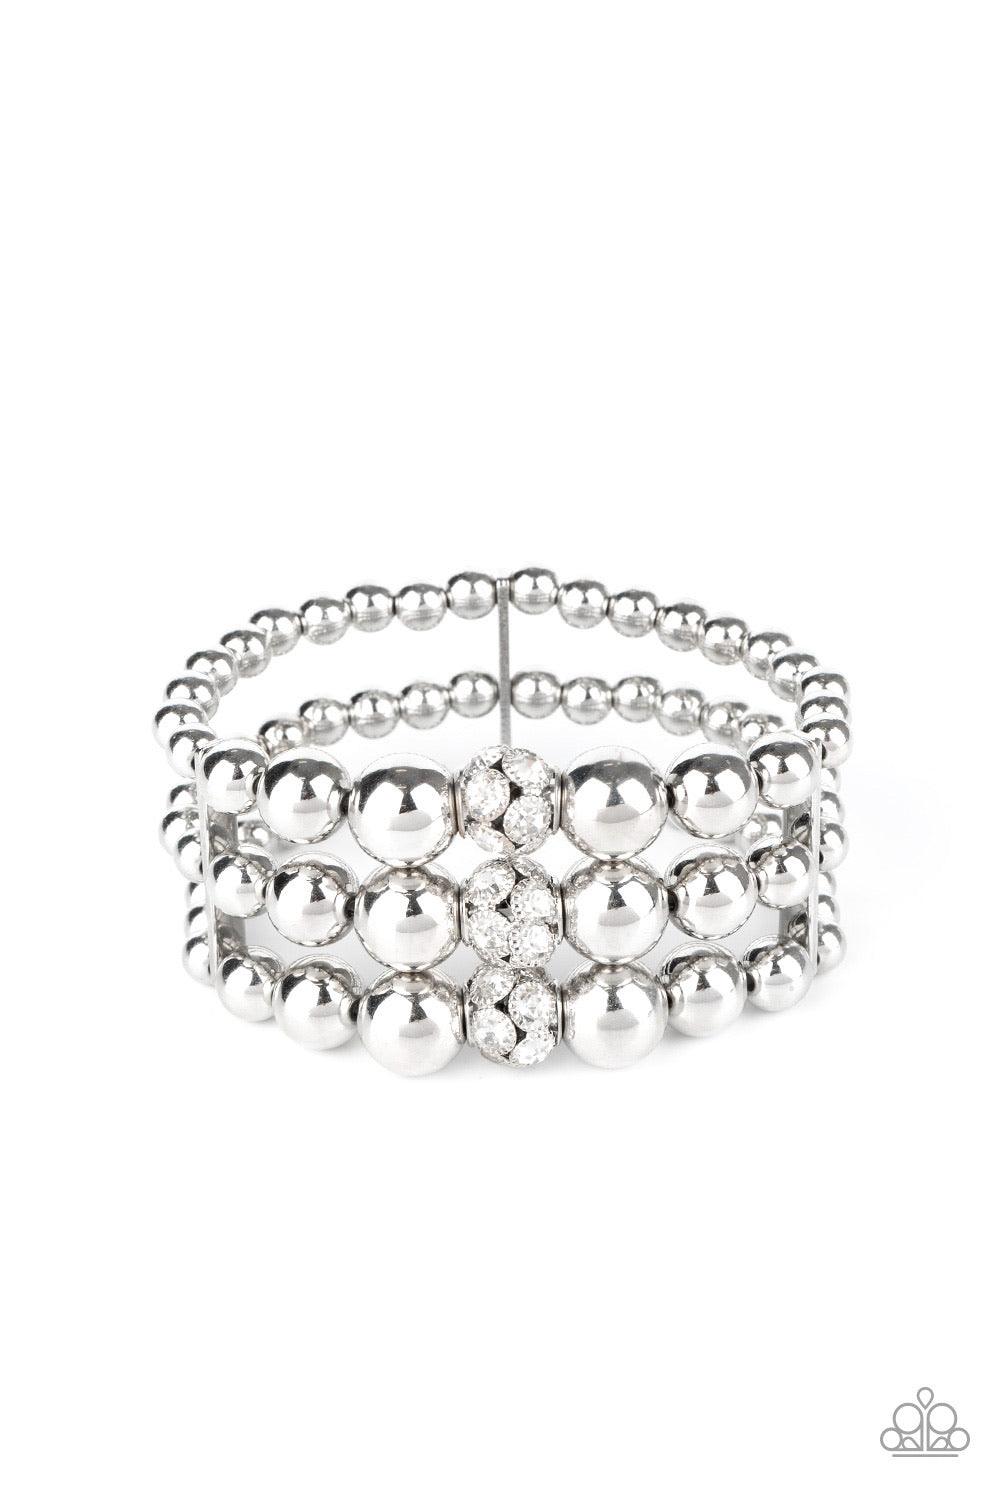 Paparazzi Accessories Icing On The Top - White Held together with dainty silver fittings, strands of silver beads are threaded along stretchy bands around the wrist. Glassy white rhinestone encrusted beads adorn the center, adding a splash of sparkle to t